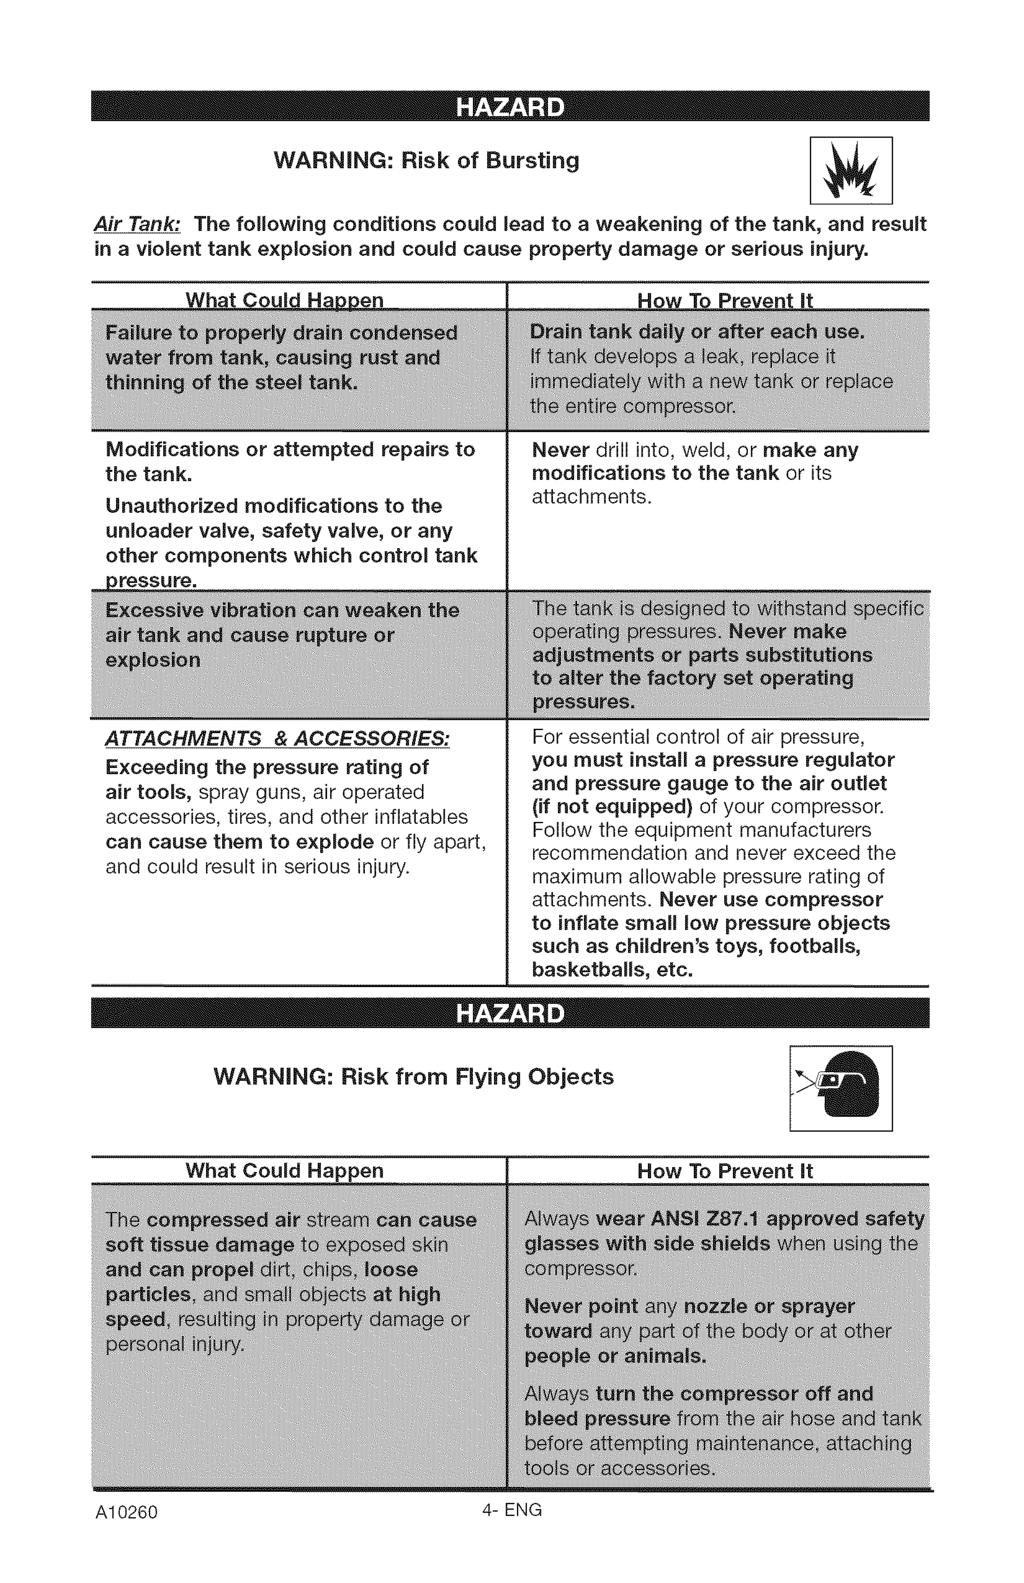 WARNING: Risk of Bursting I_1 Air Tank: The following conditions could lead to a weakening of the tank, and result in a violent tank explosion and could cause property damage or serious injury.